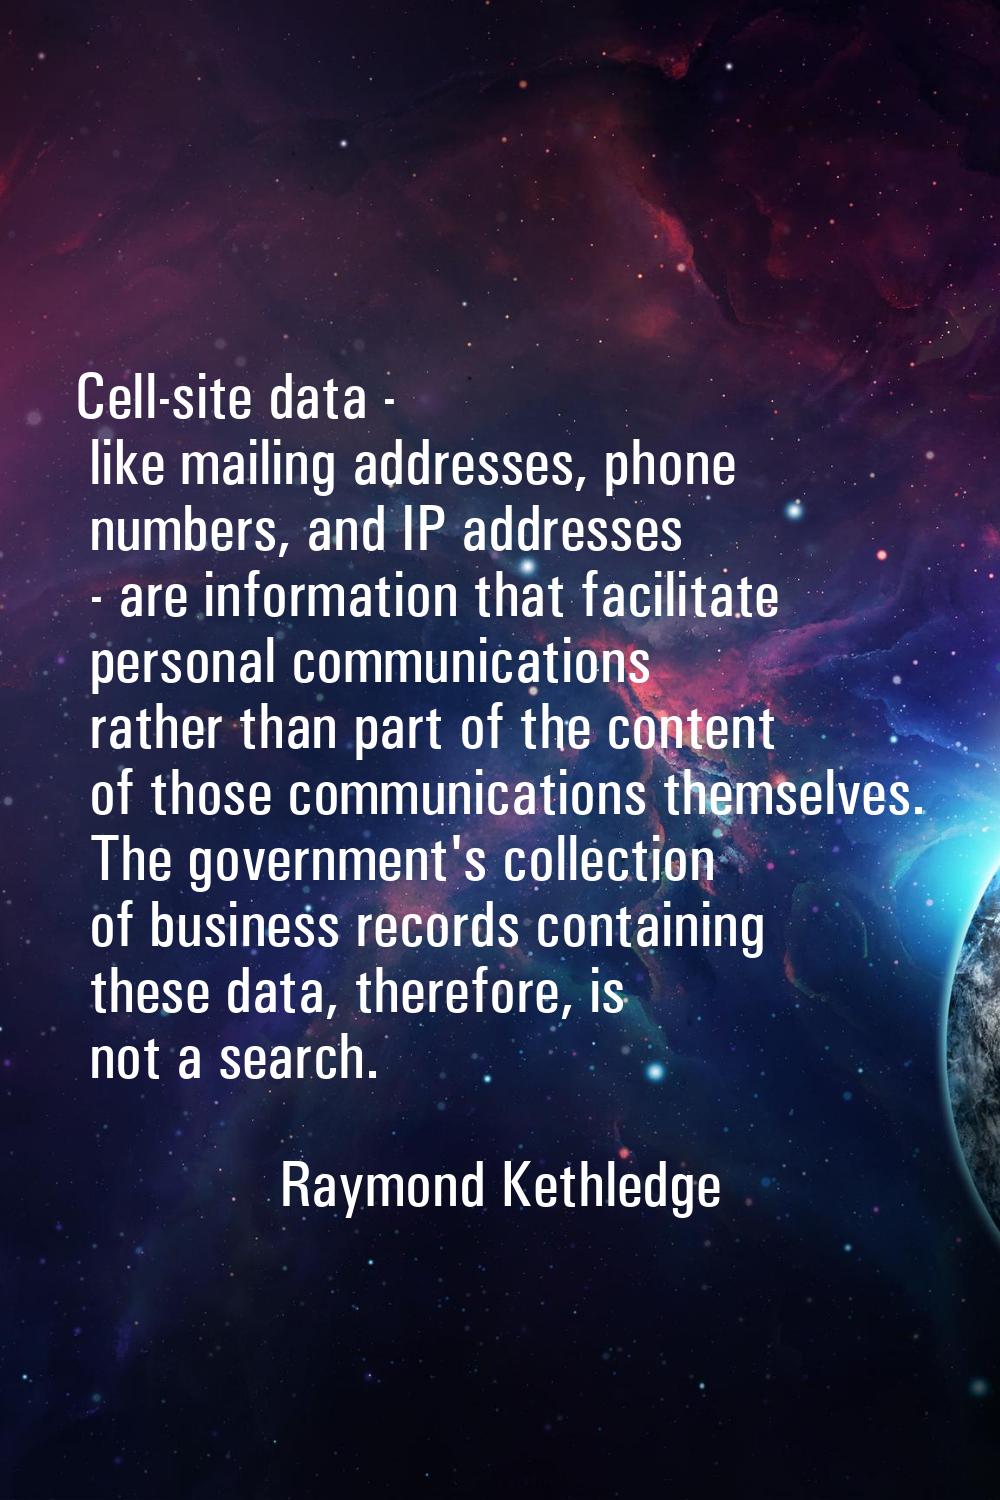 Cell-site data - like mailing addresses, phone numbers, and IP addresses - are information that fac